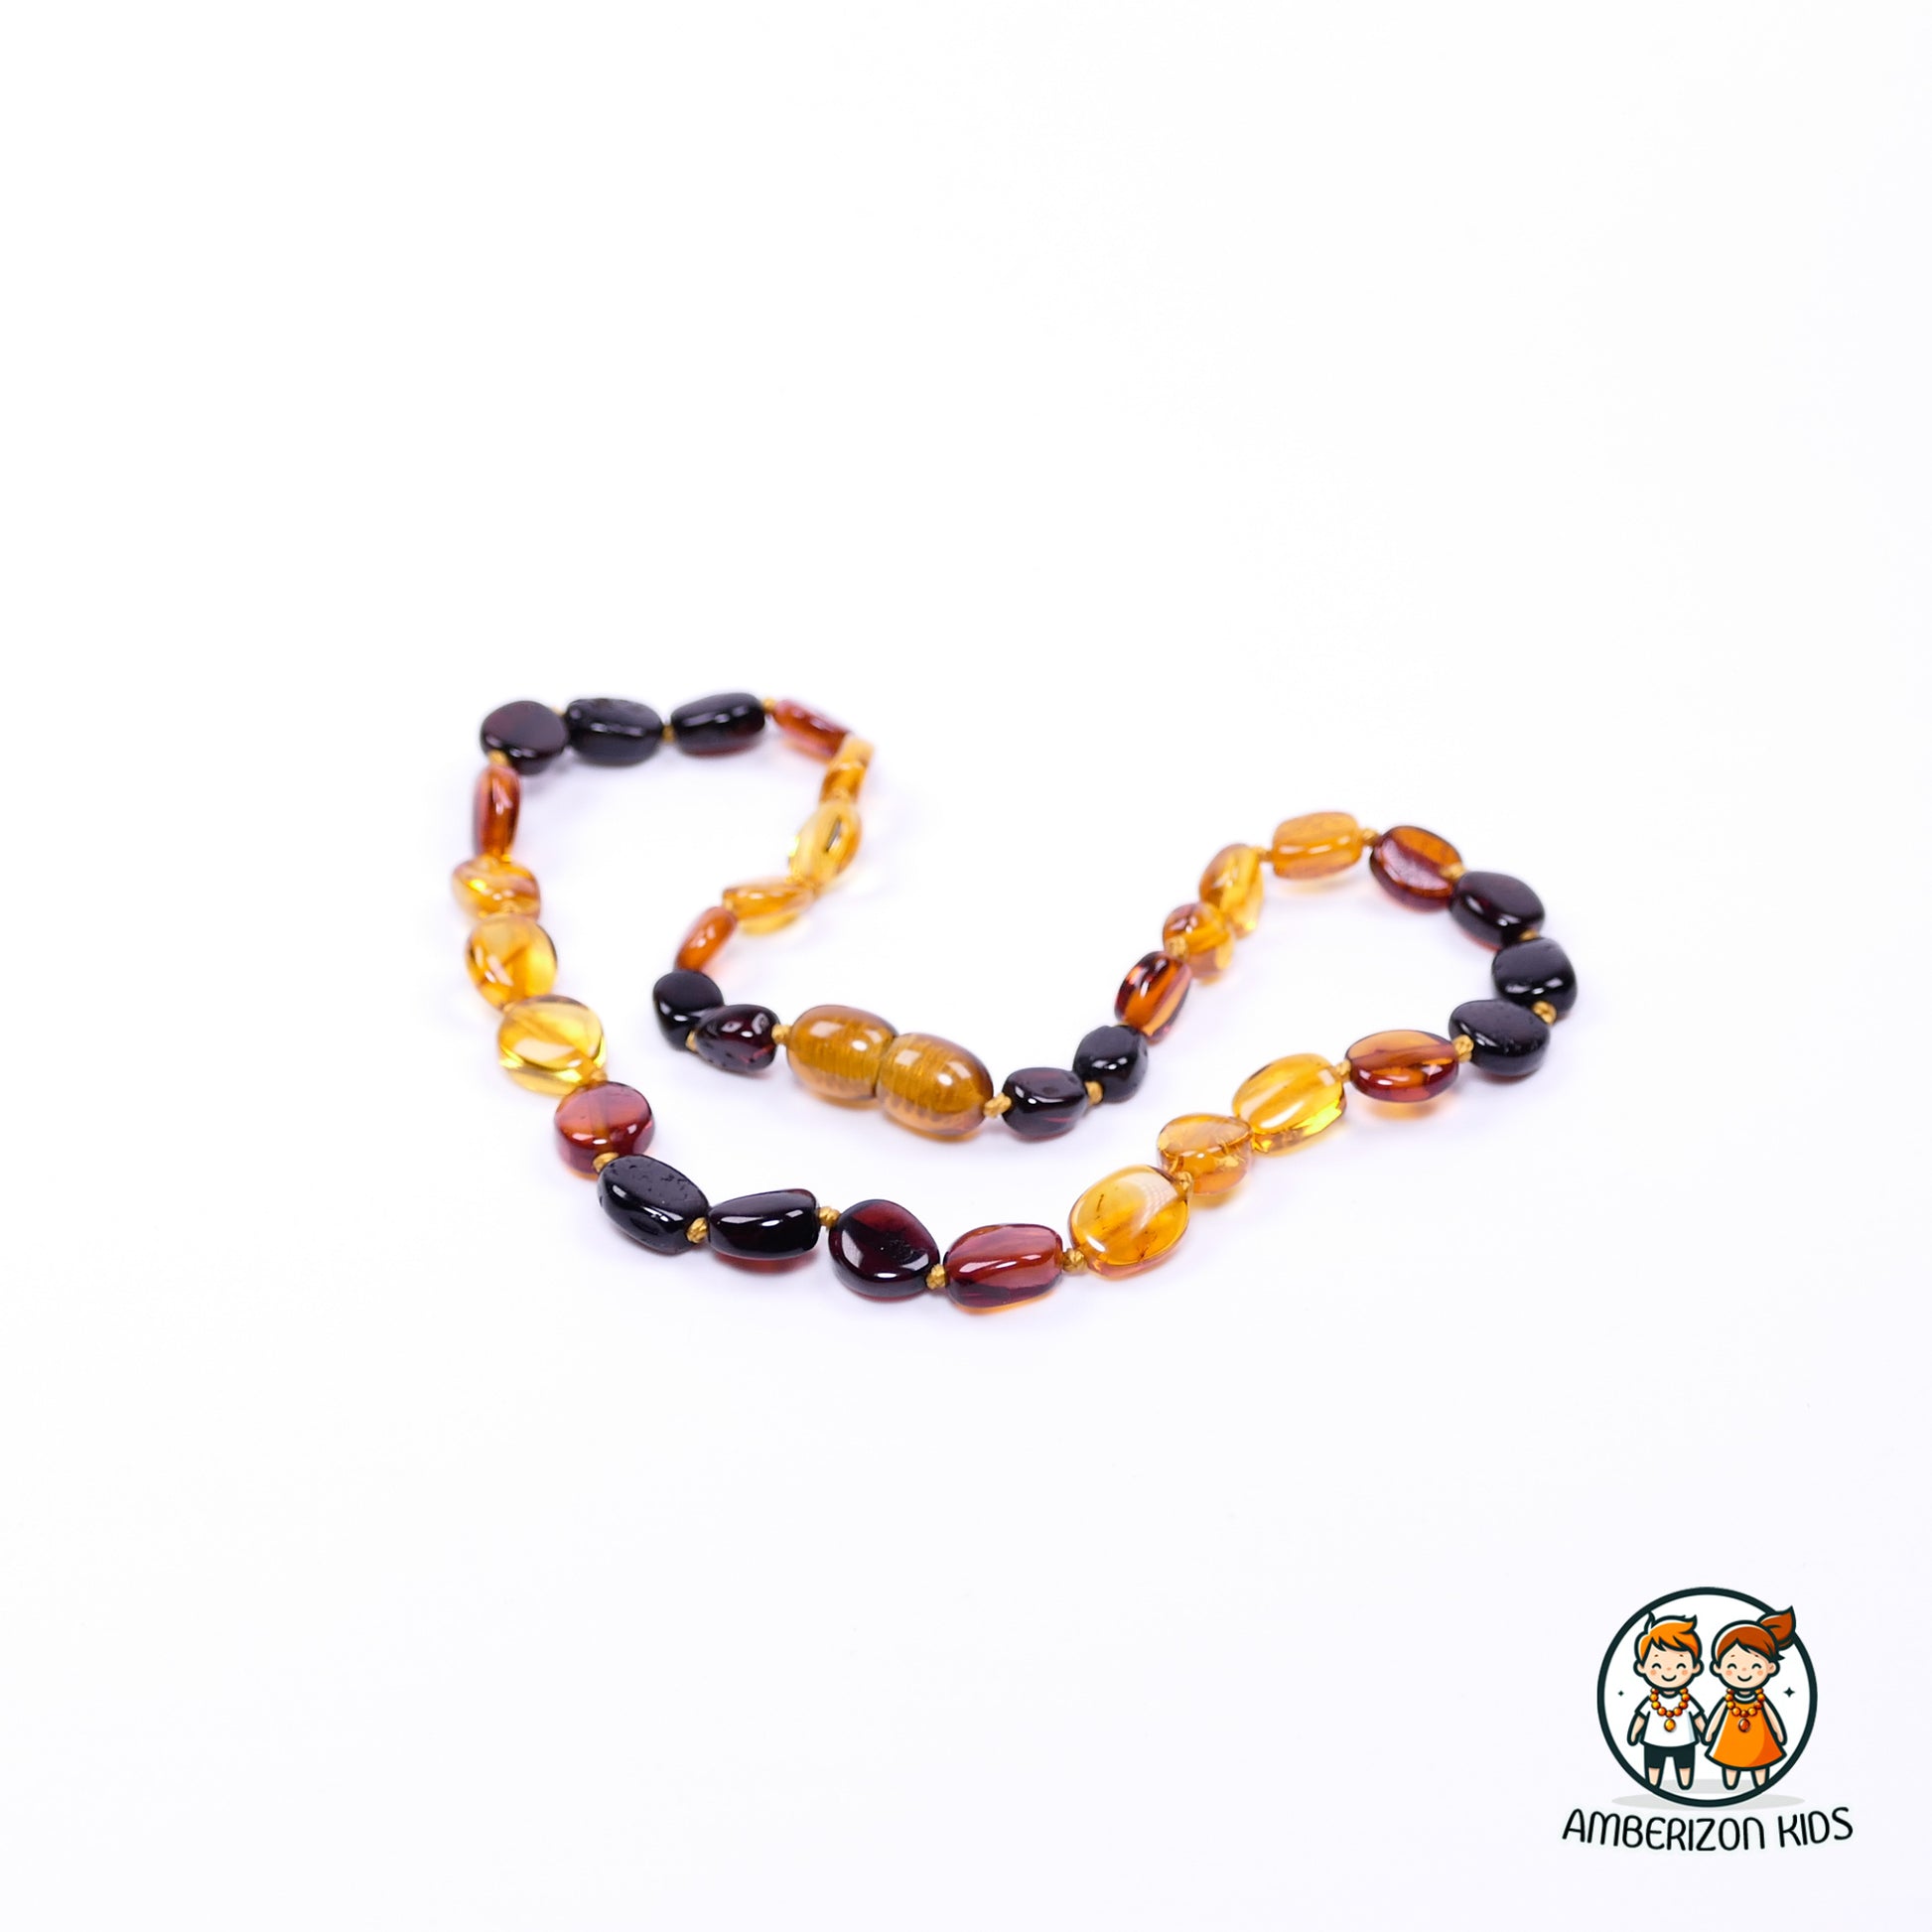 Unisex Baby Necklace - Handpicked Olive Amber Beads in a Multicolored Gradient